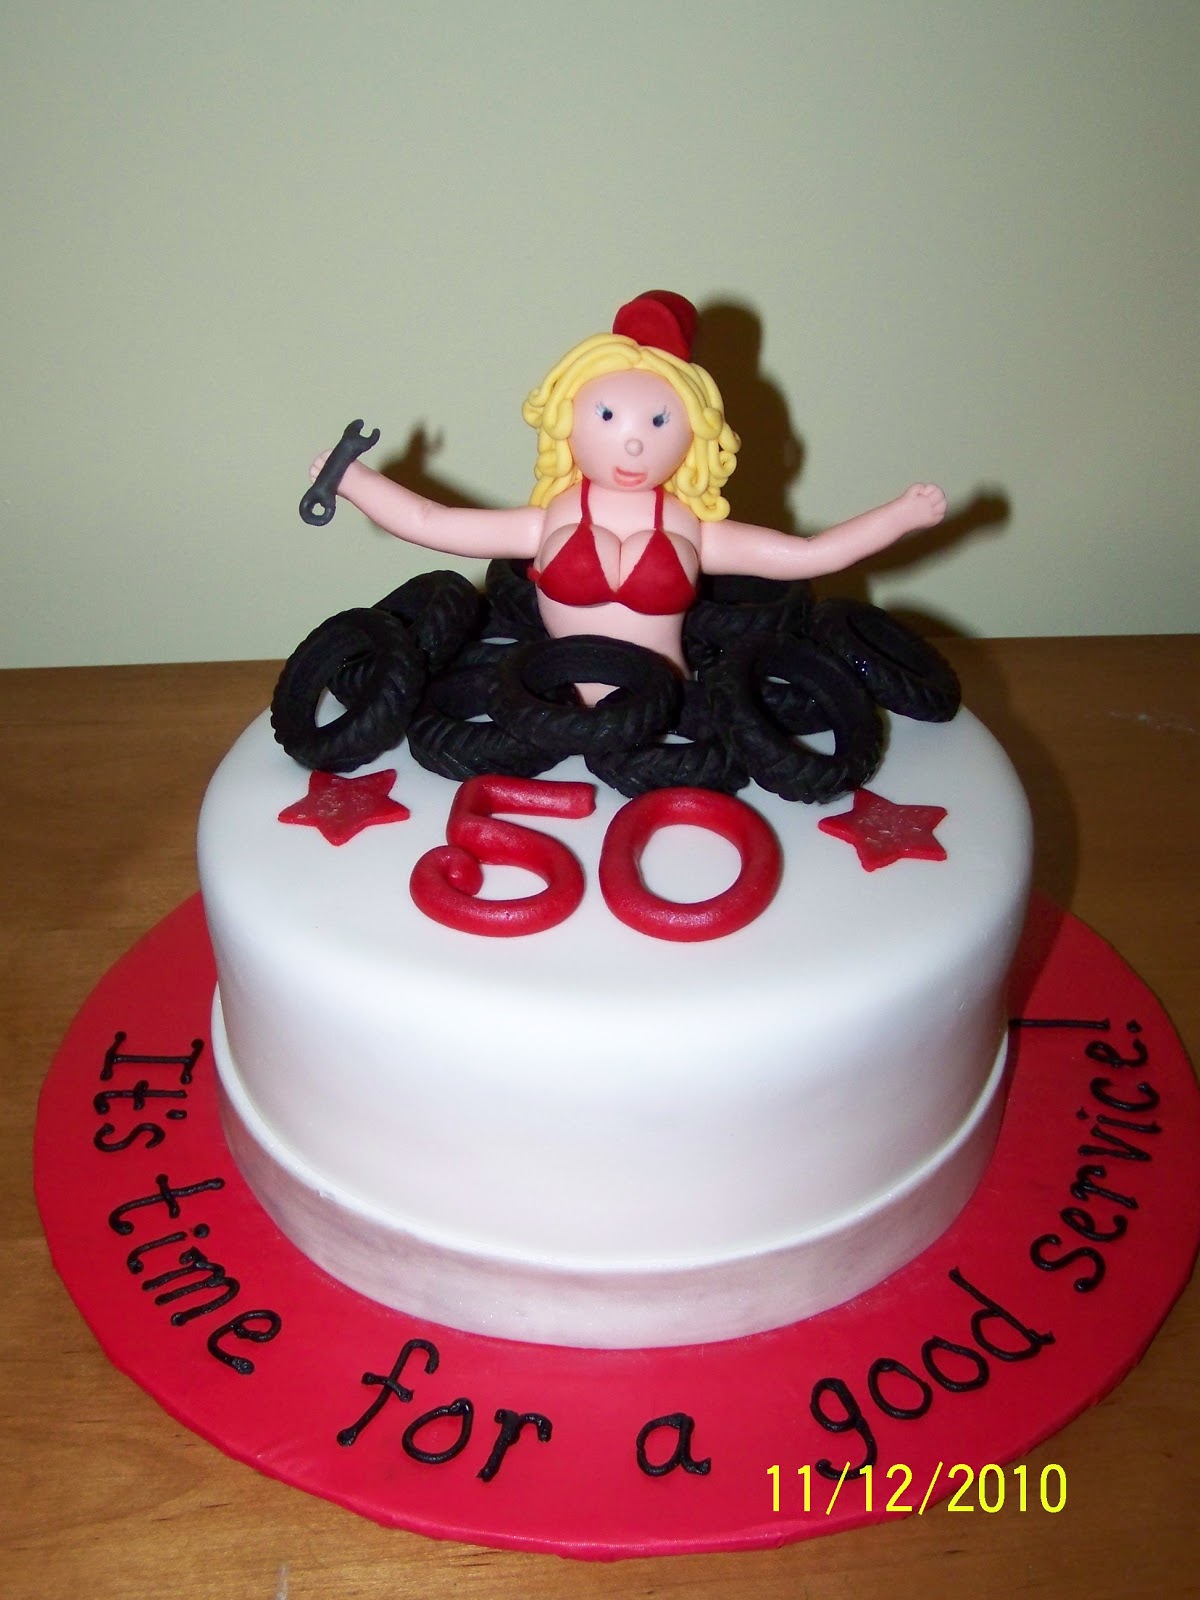 funny 50th birthday cakes for men - Google Search | Cake ...